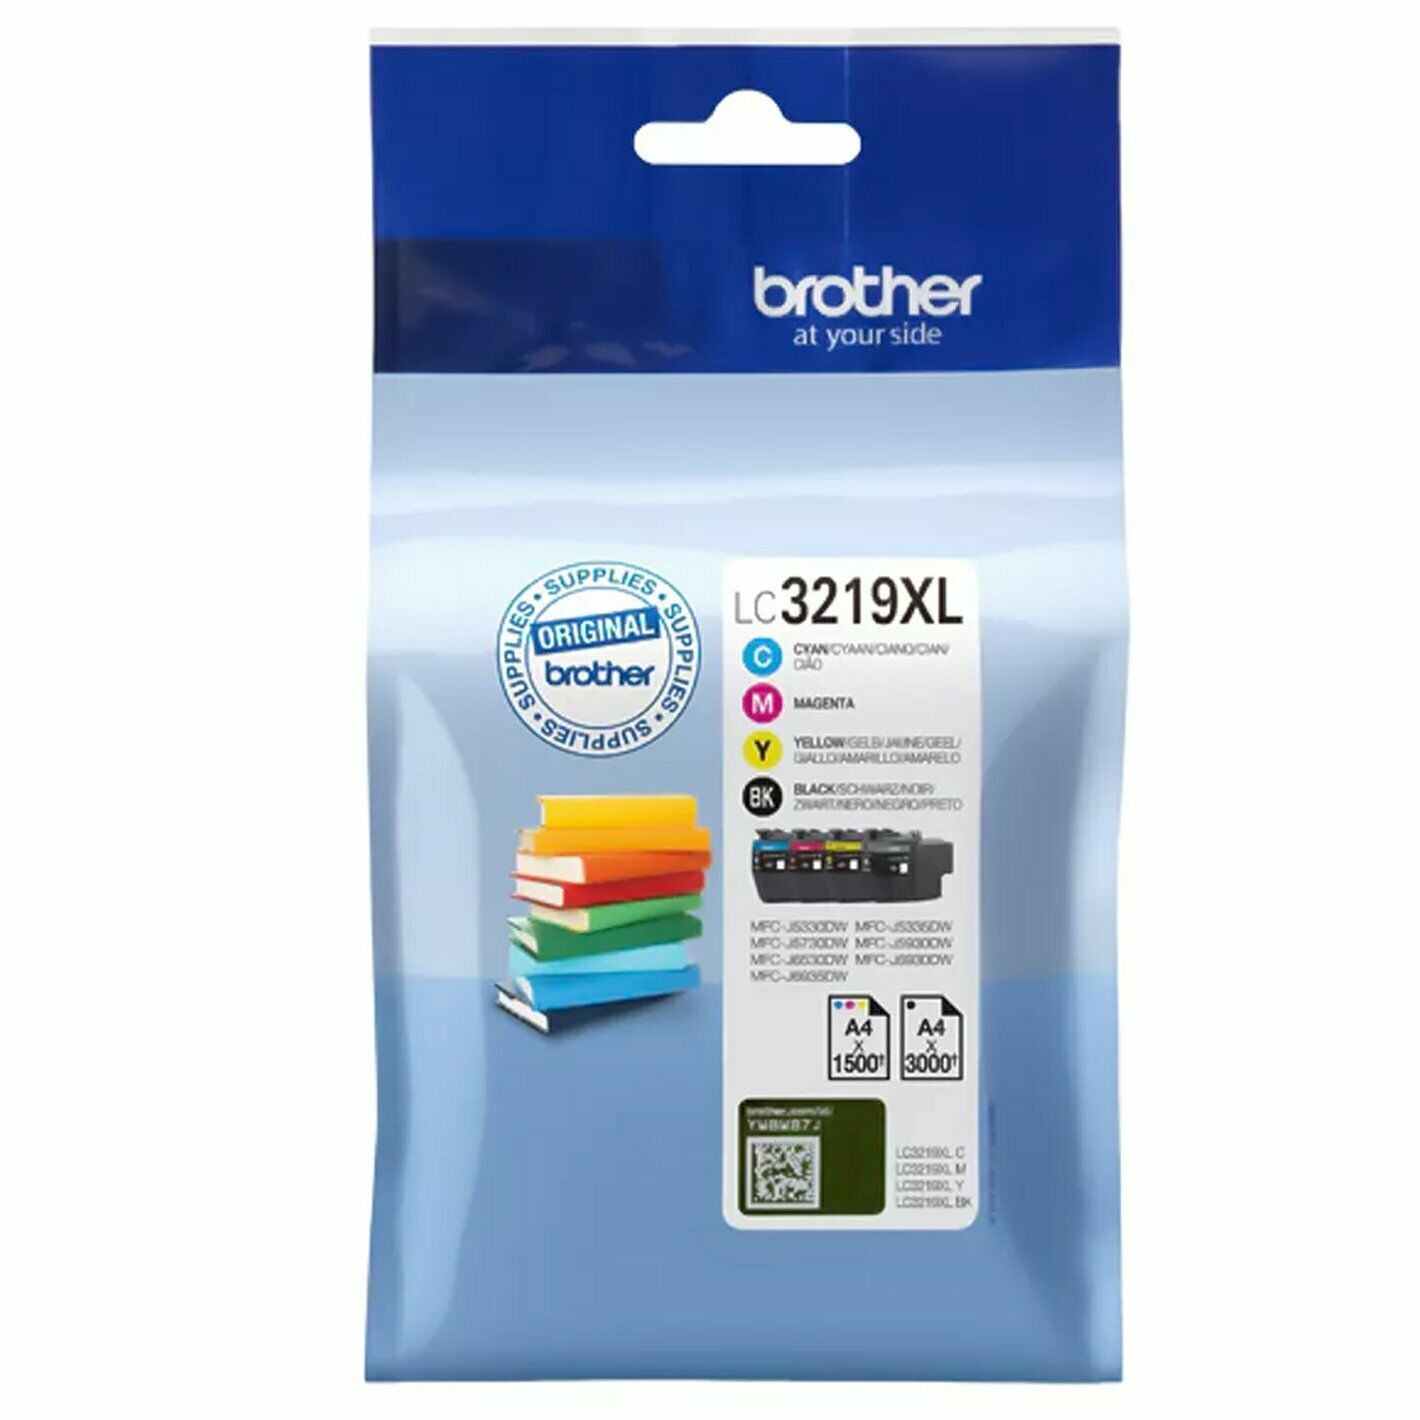 Brother LC-3219XLVAL Ink cartridge multi Pack qty 4.